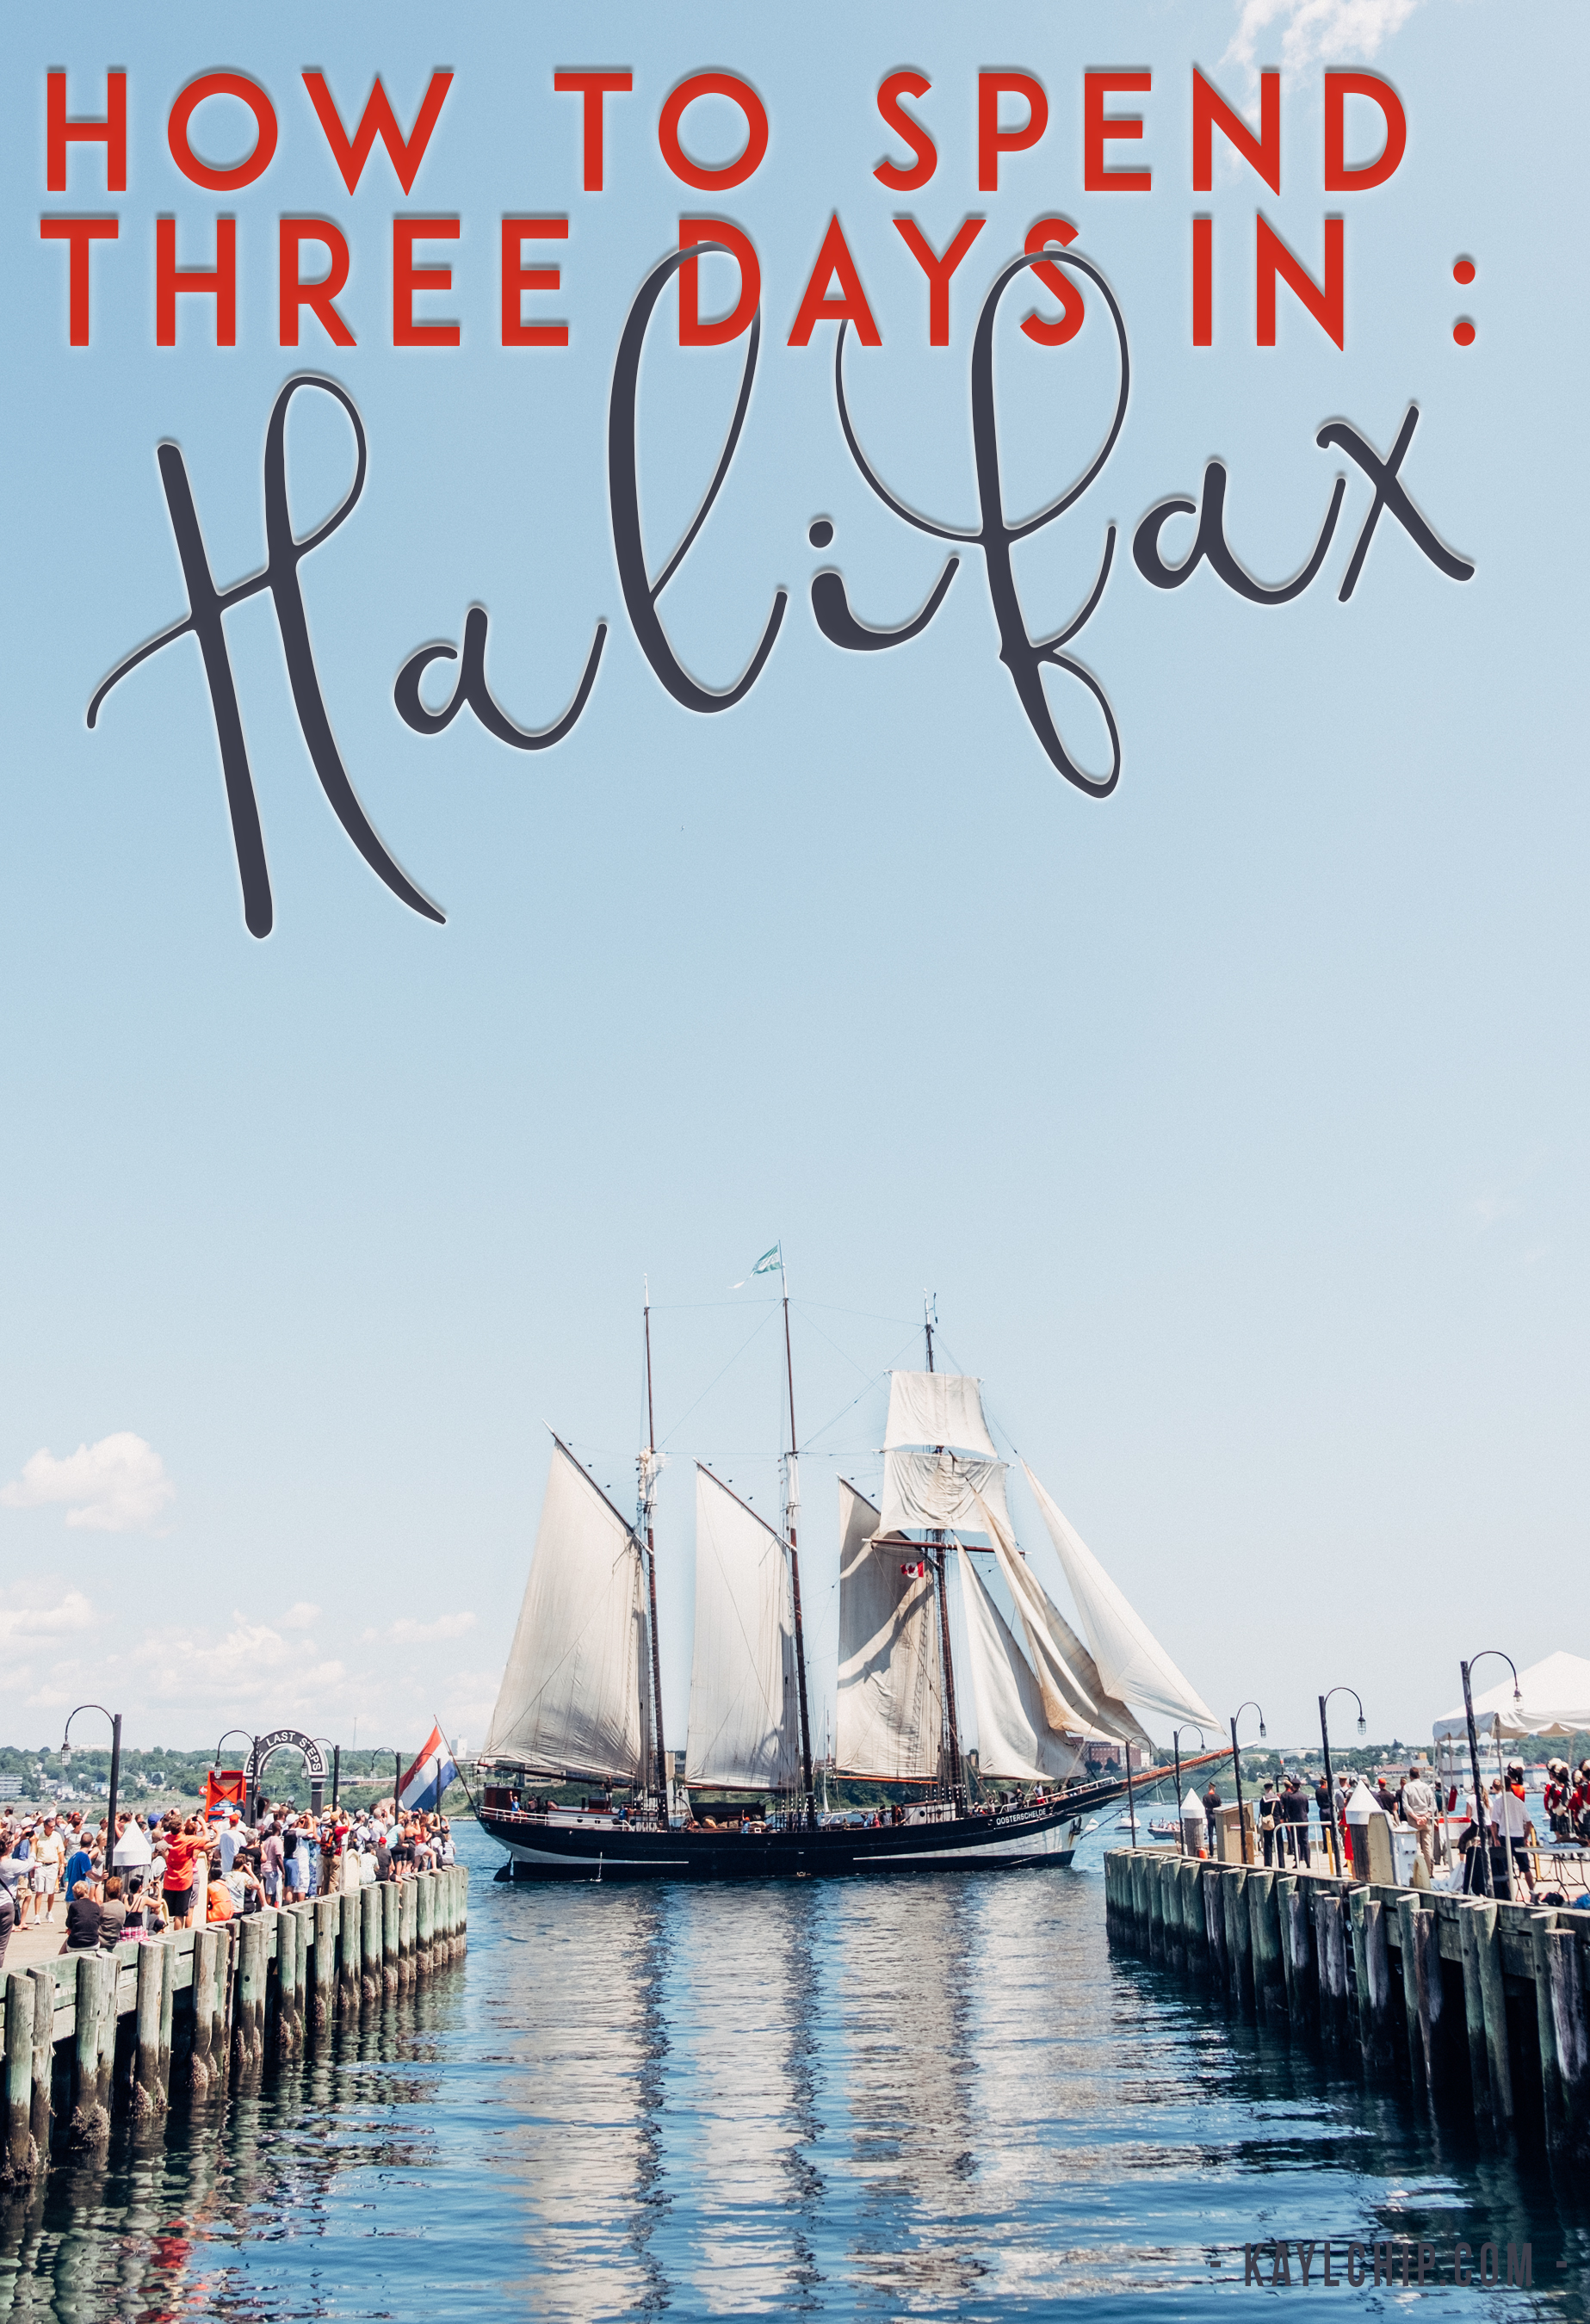 How to spend 3 days in Halifax